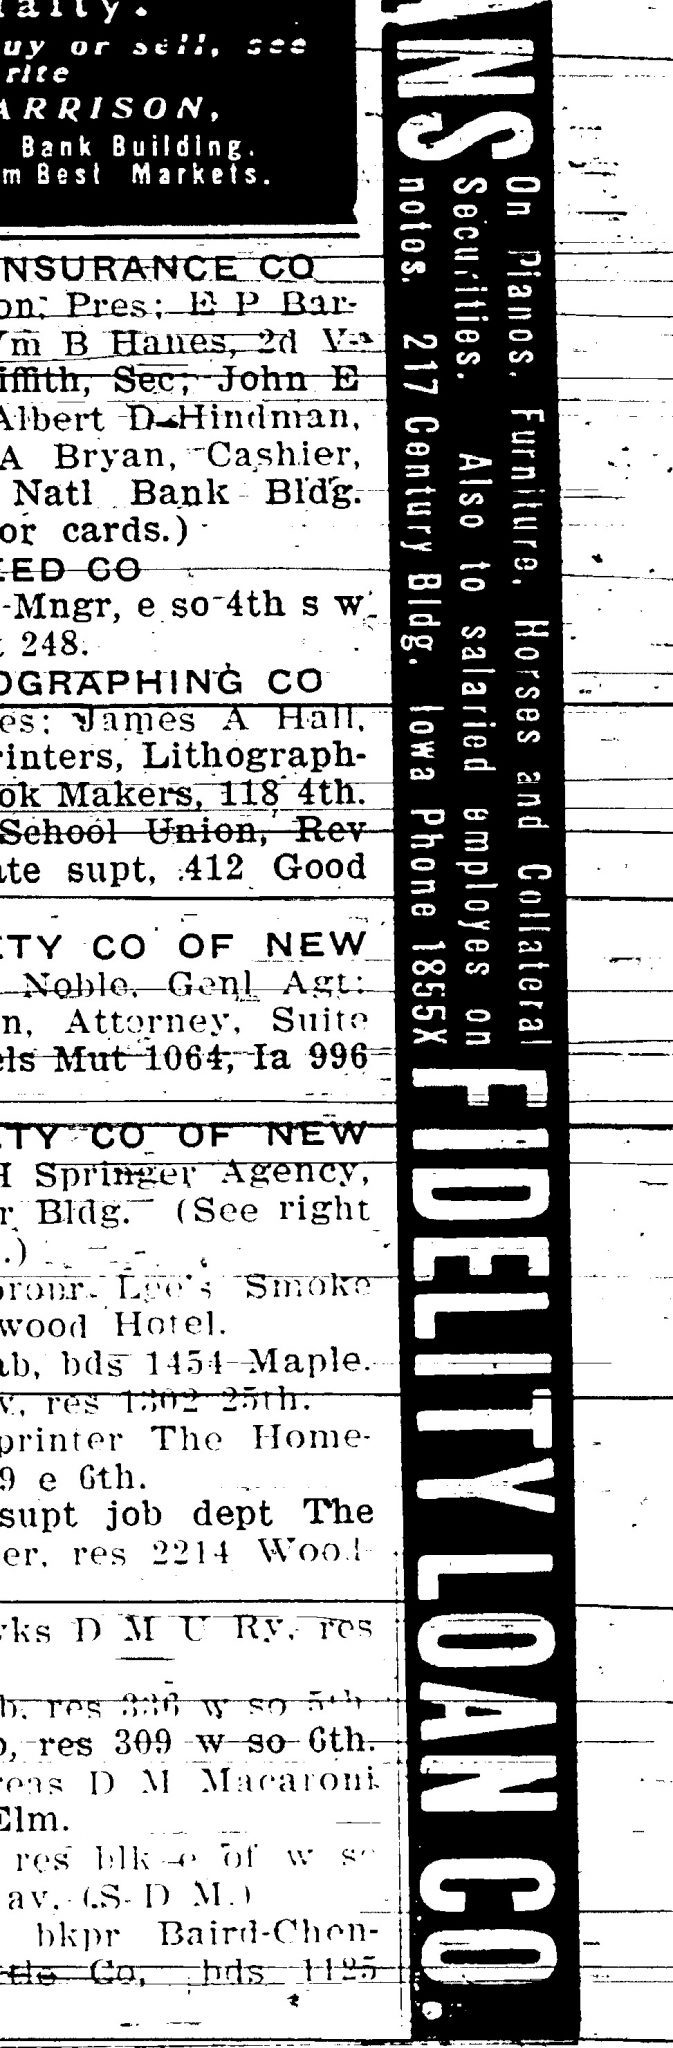 Image from page 116 of "1906 Des Moines and Polk County, Iowa, City Directory" (1906)